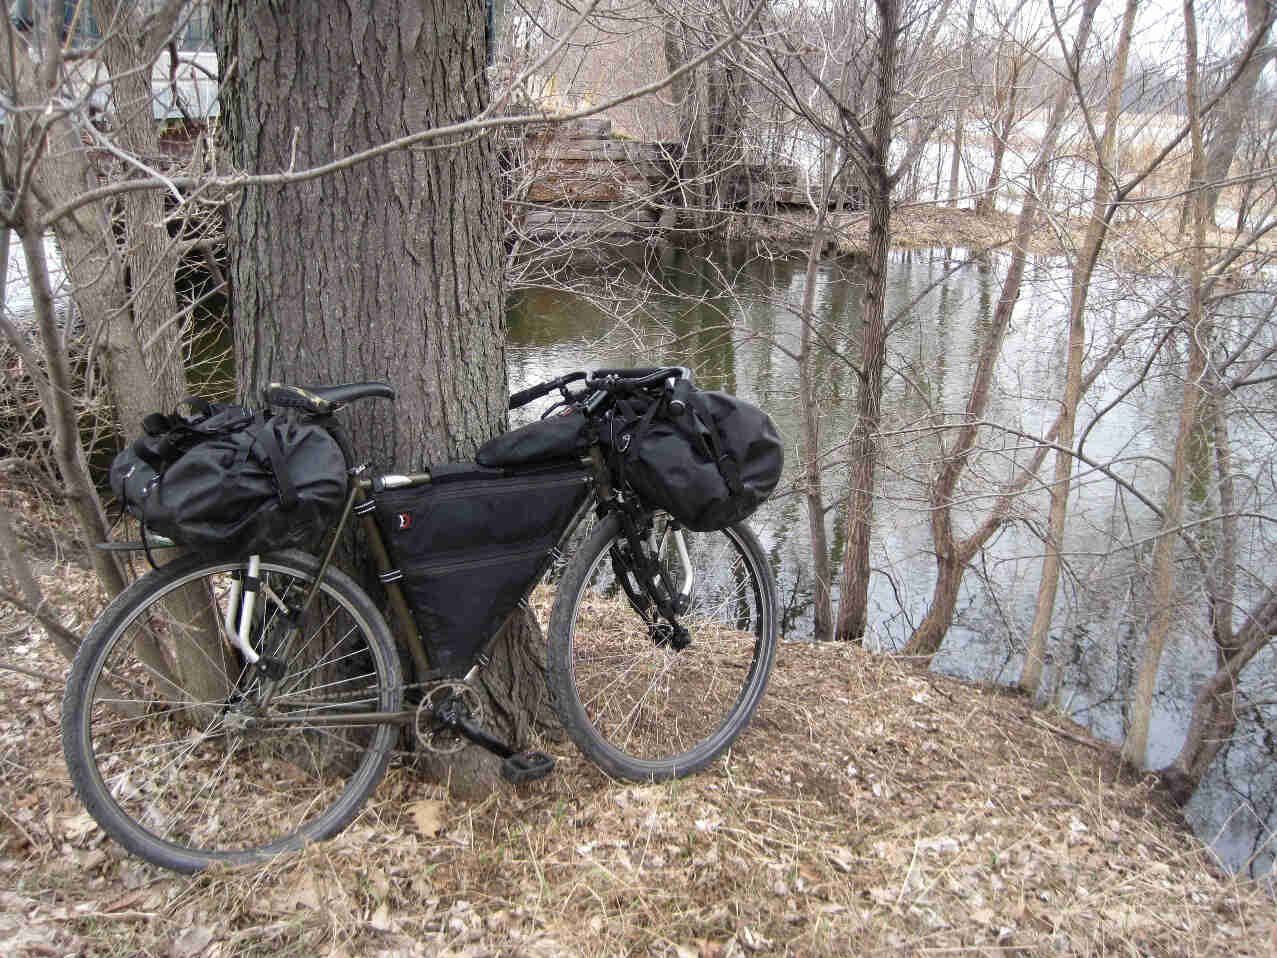 Right side view of a Surly Travelers Check bike with gear, leaning against a tree, on a bank and facing a pond